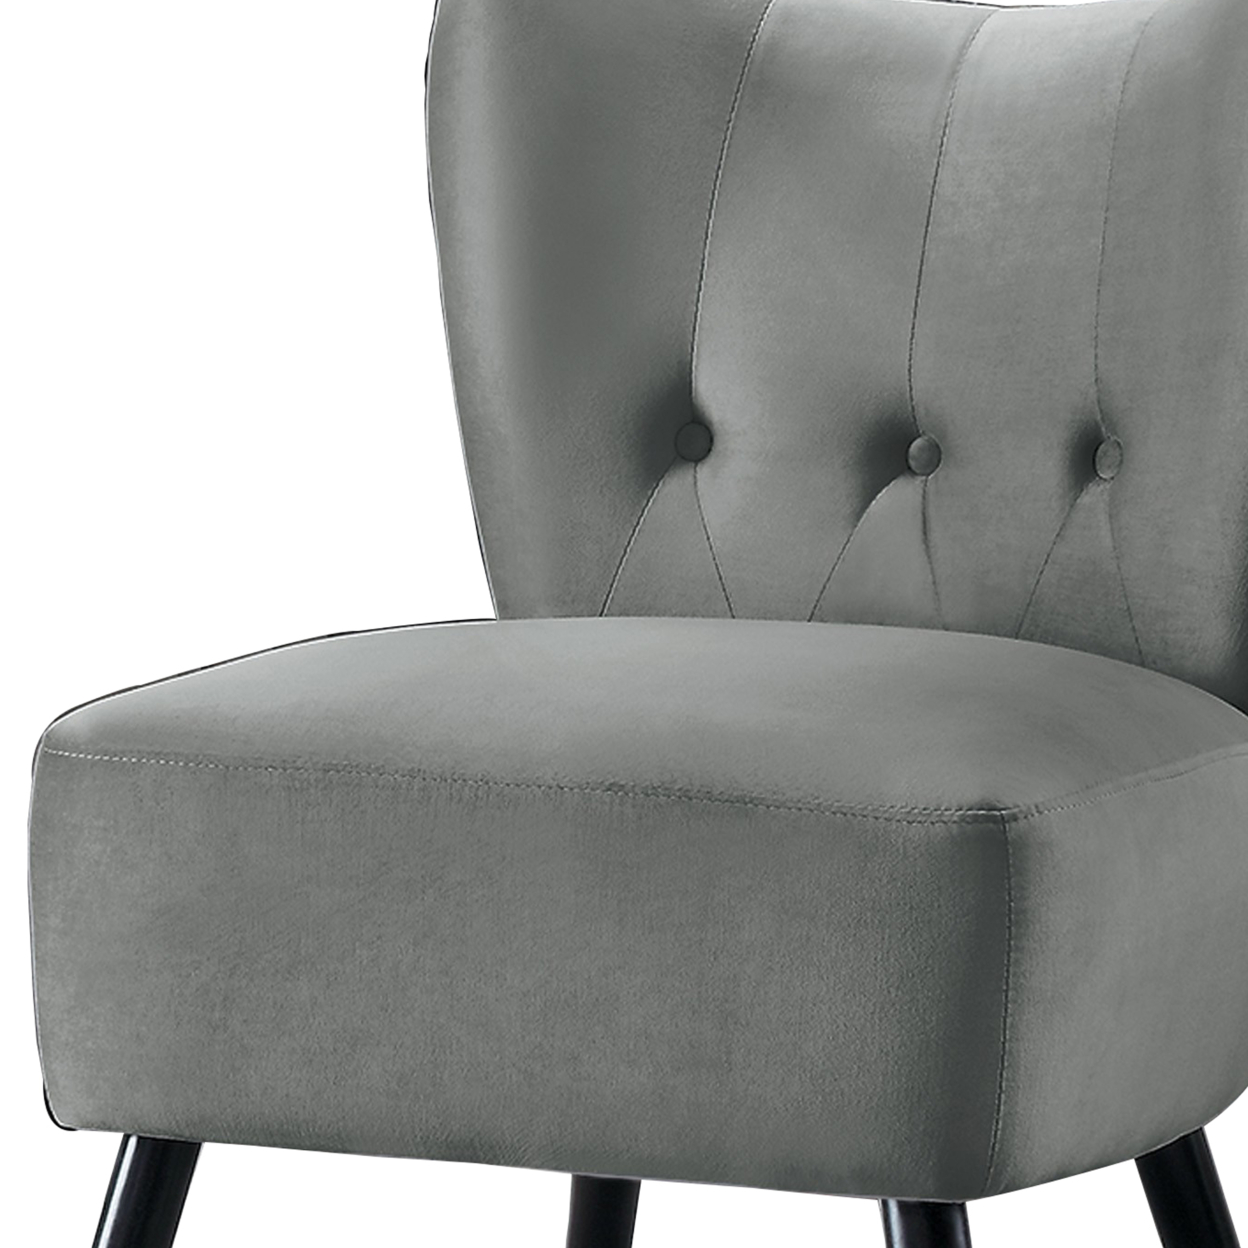 Upholstered Armless Accent Chair With Flared Back And Button Tufting, Gray- Saltoro Sherpi